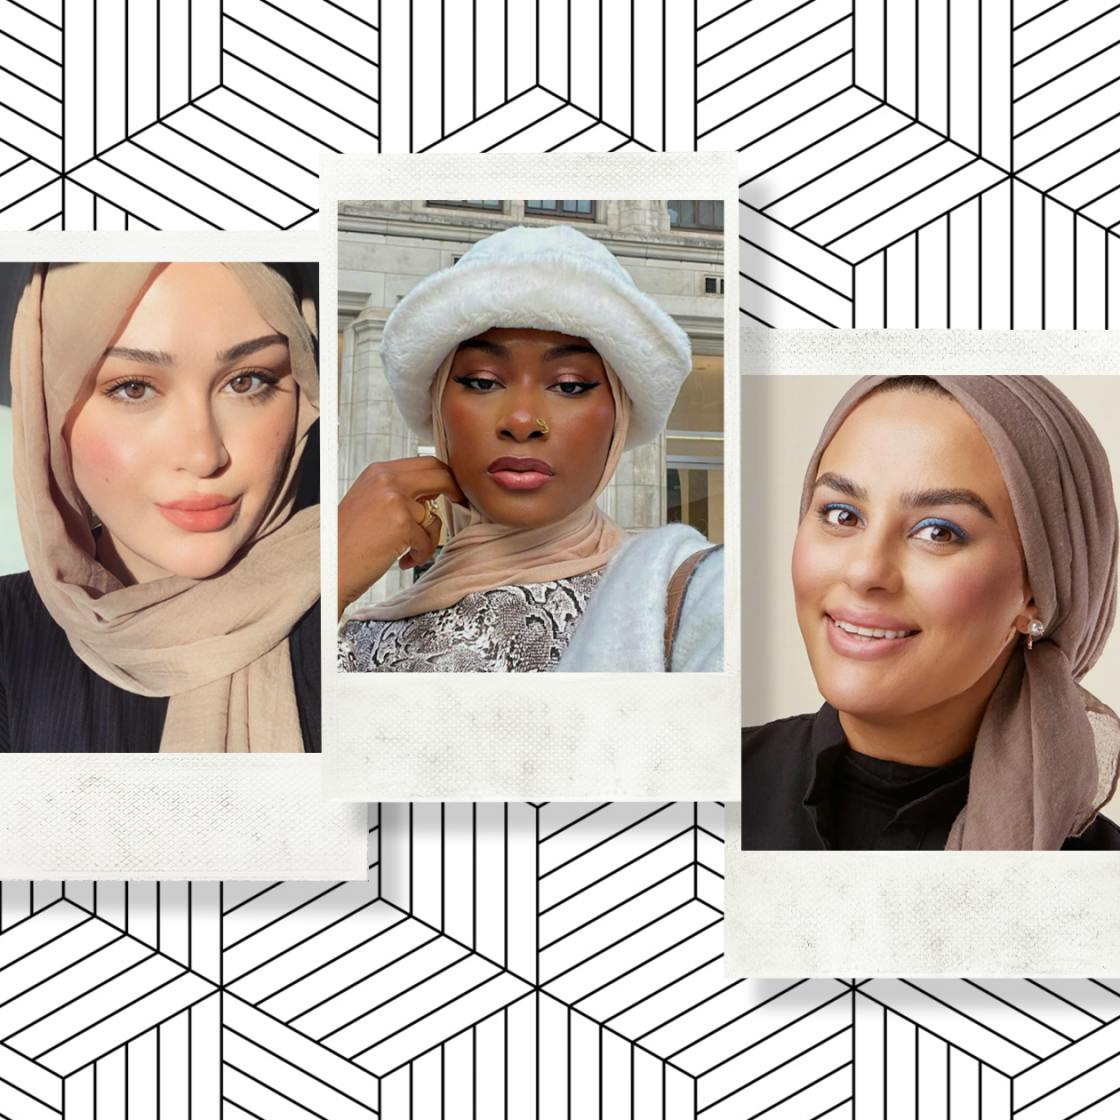 World Hijab Day: 4 Muslim women on how they care for their hair